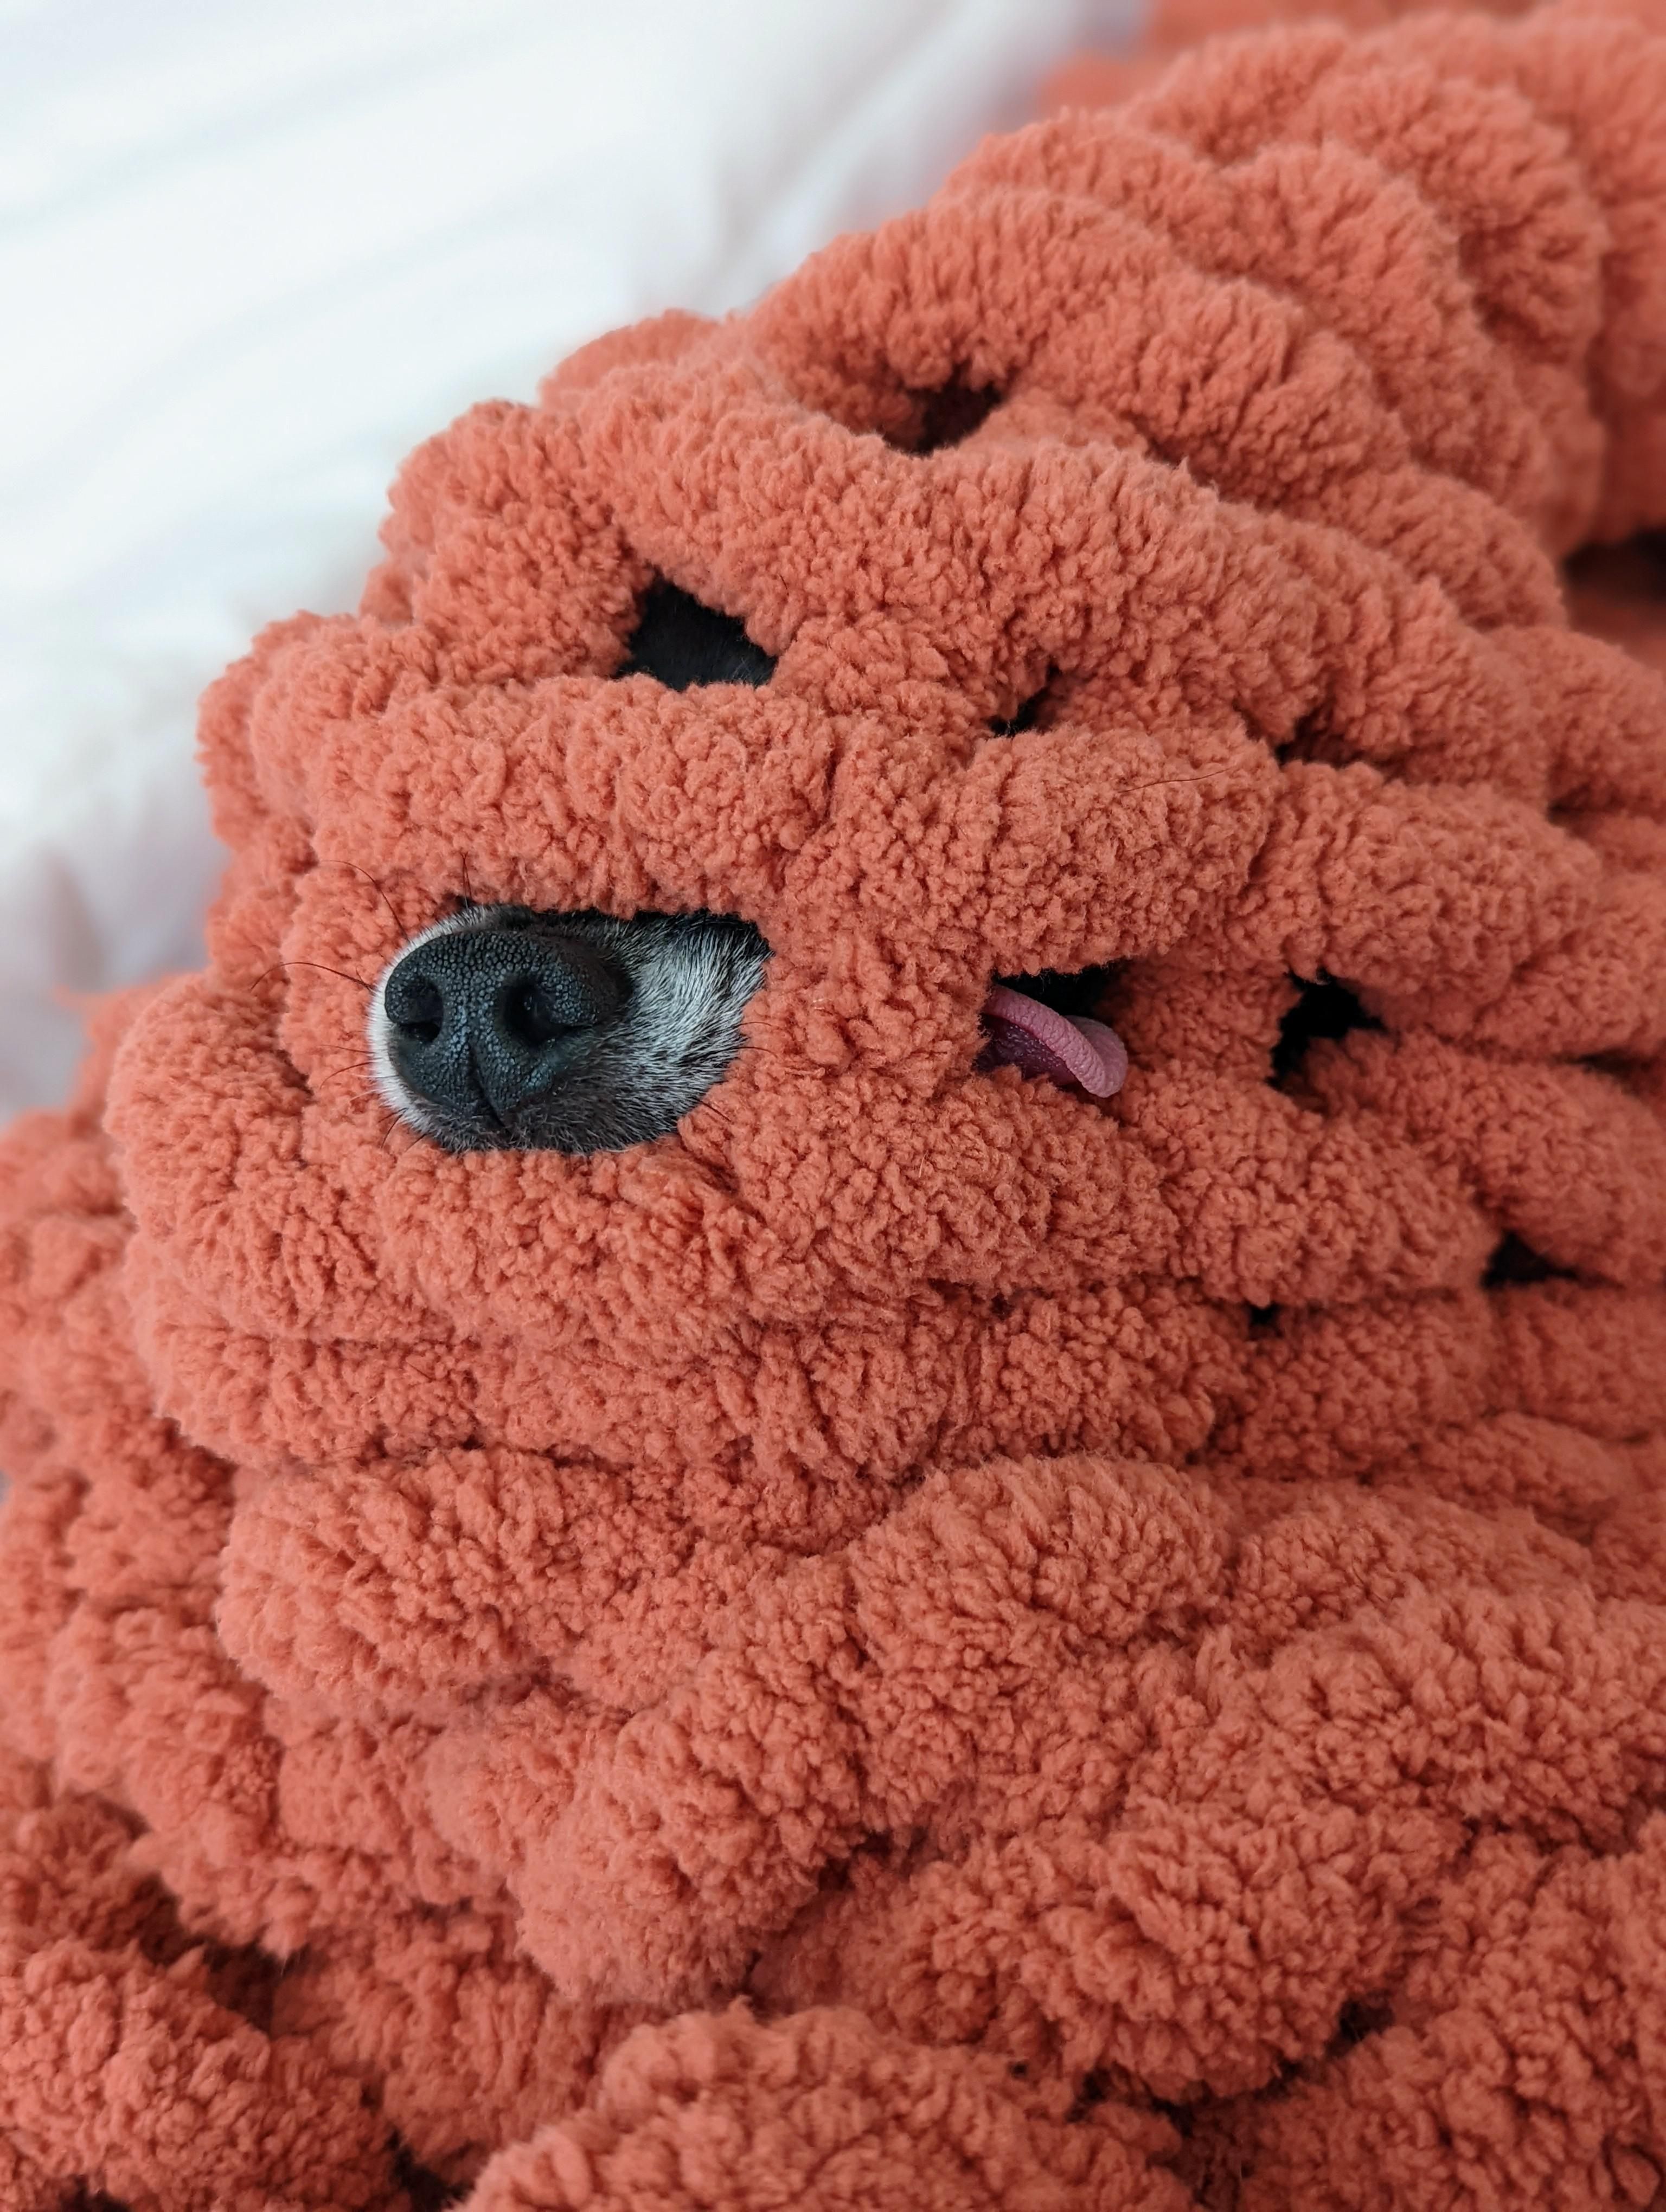 Our dog whose tongue always sticks out in a blanket with holes